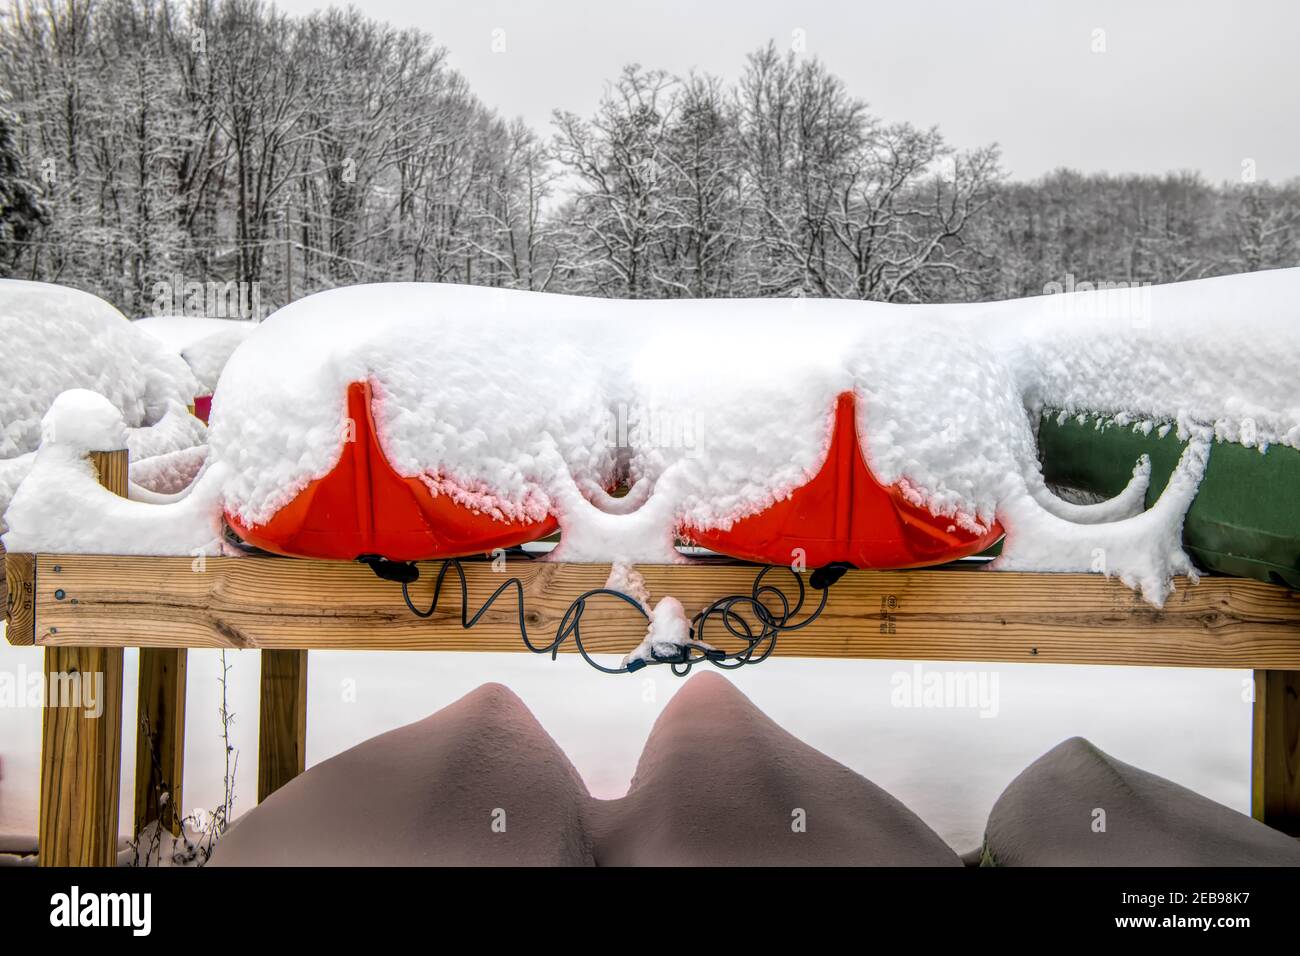 Closeup shot of kanu boats covered in snow near a forest in winter Stock Photo